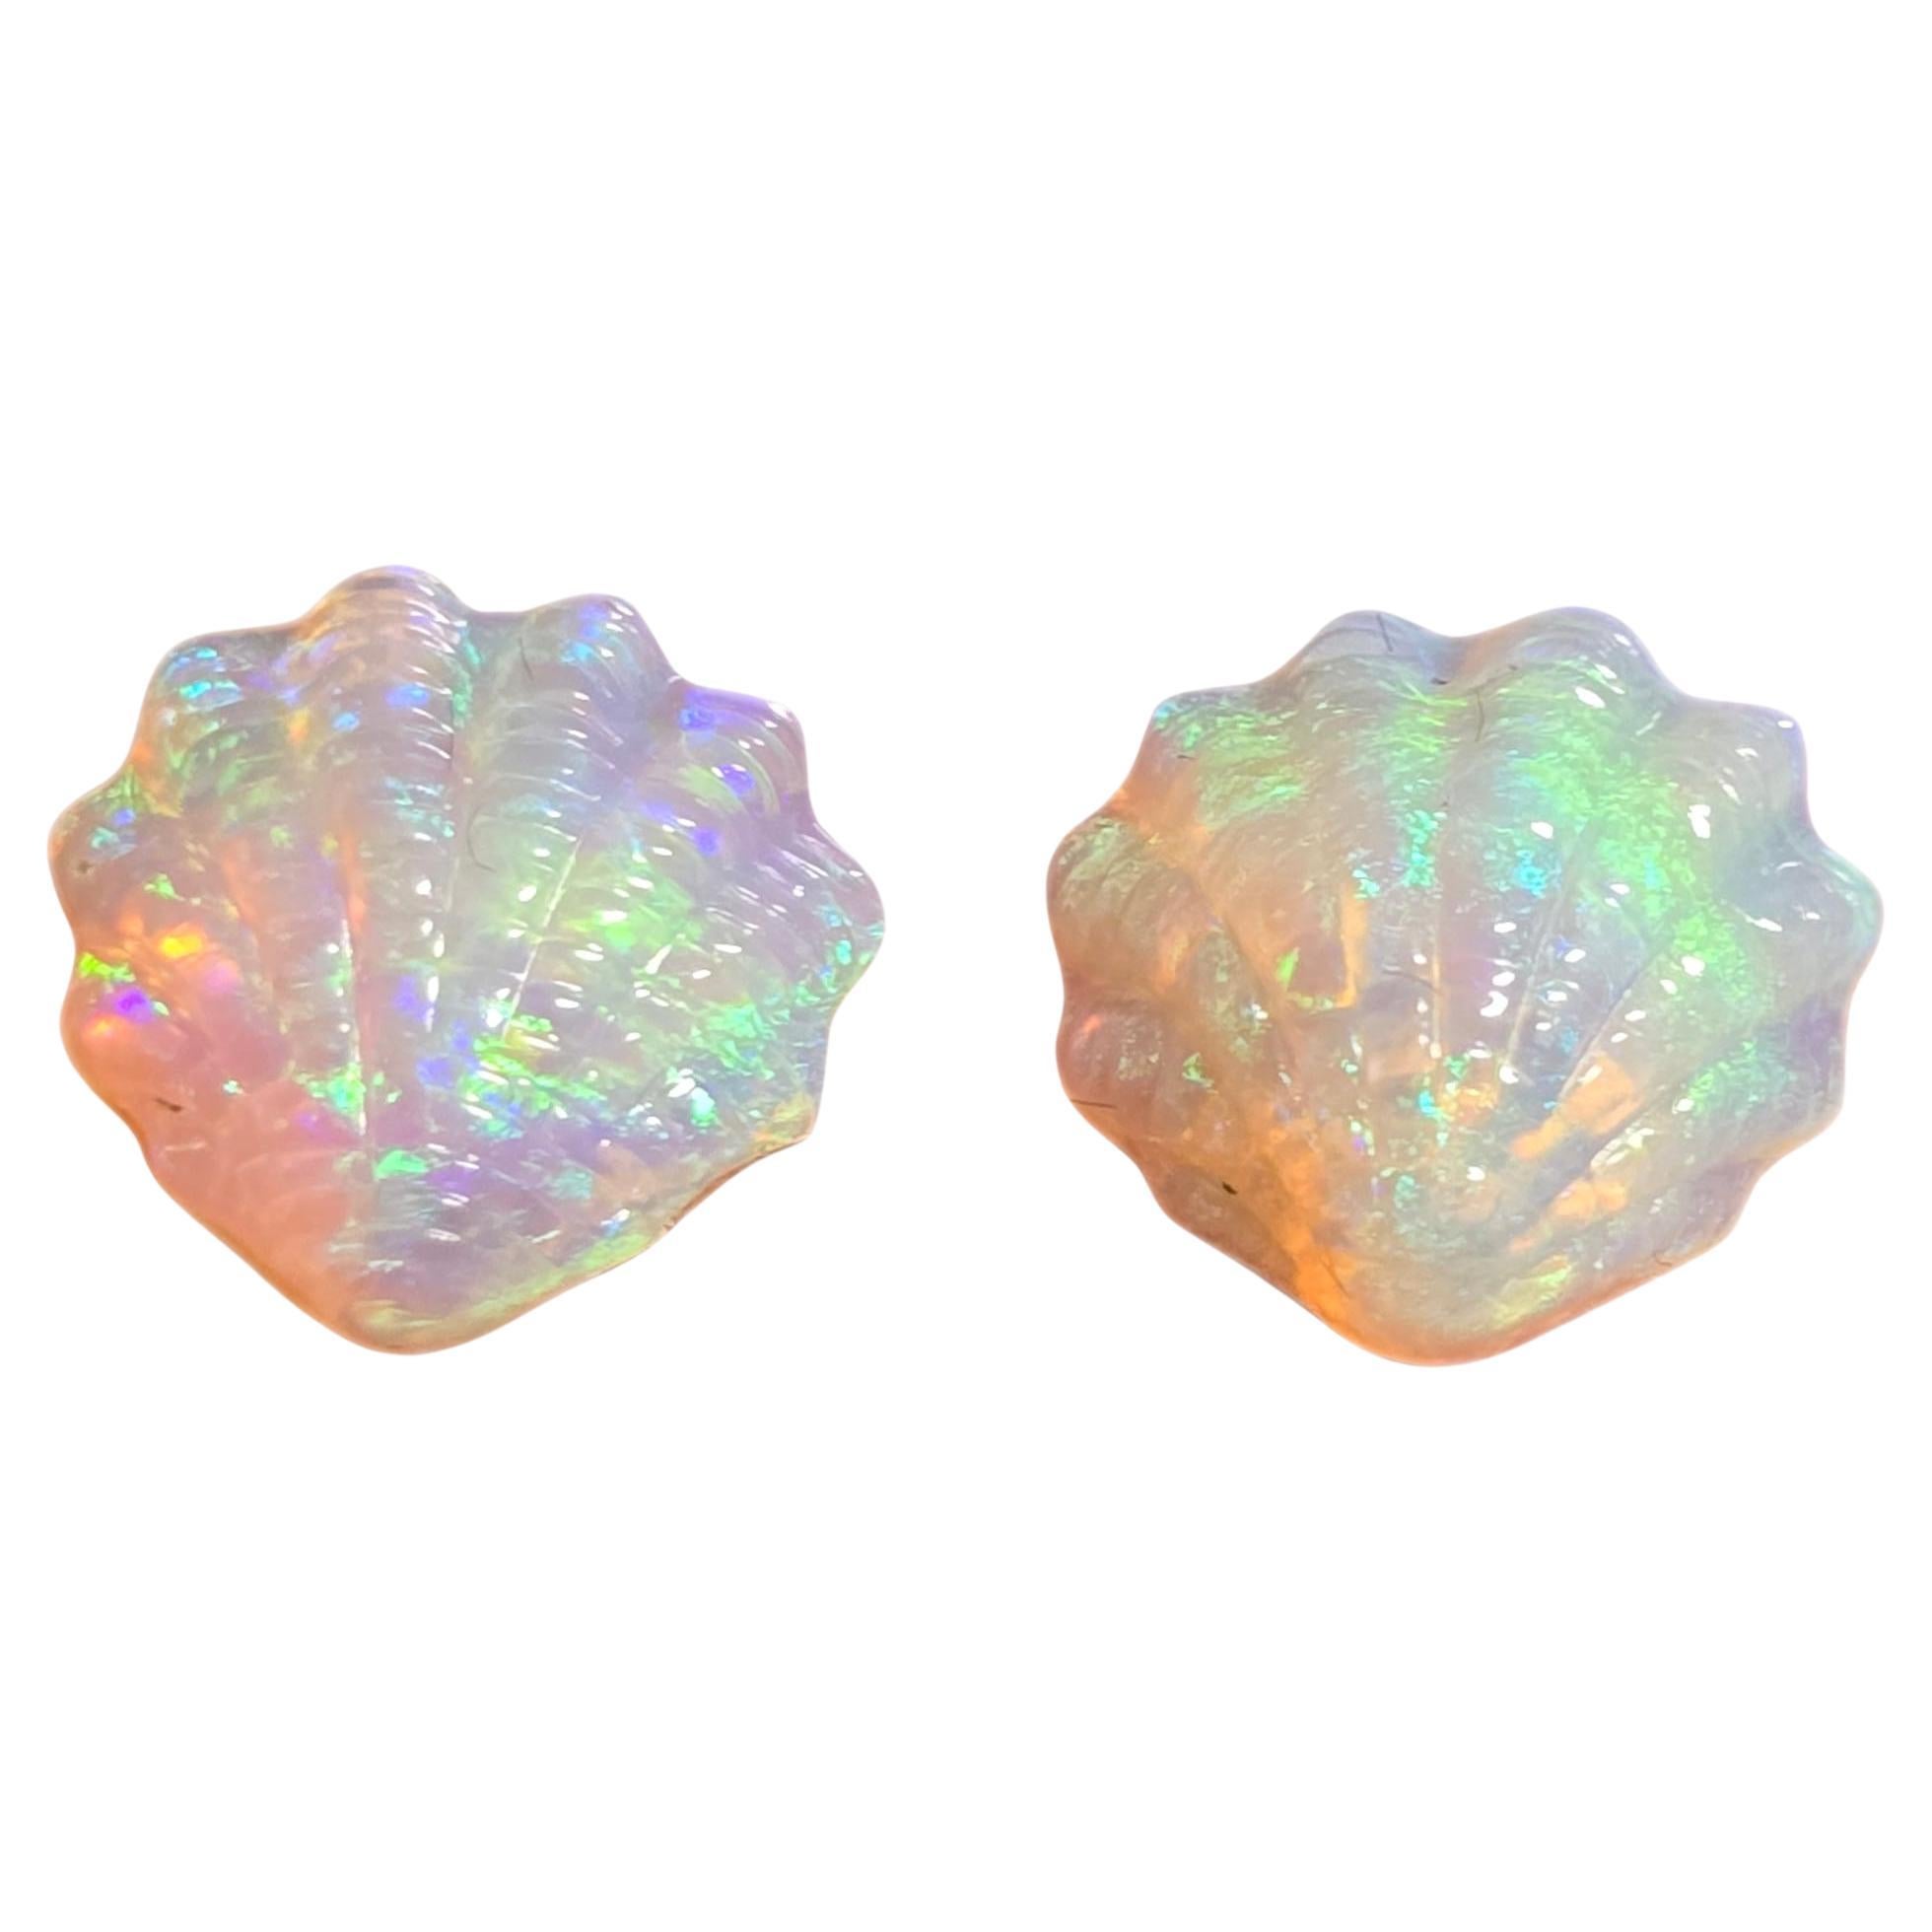 Natural 4.88 Ct Crystal Shell Australian opal pair mined by Sue Cooper For Sale